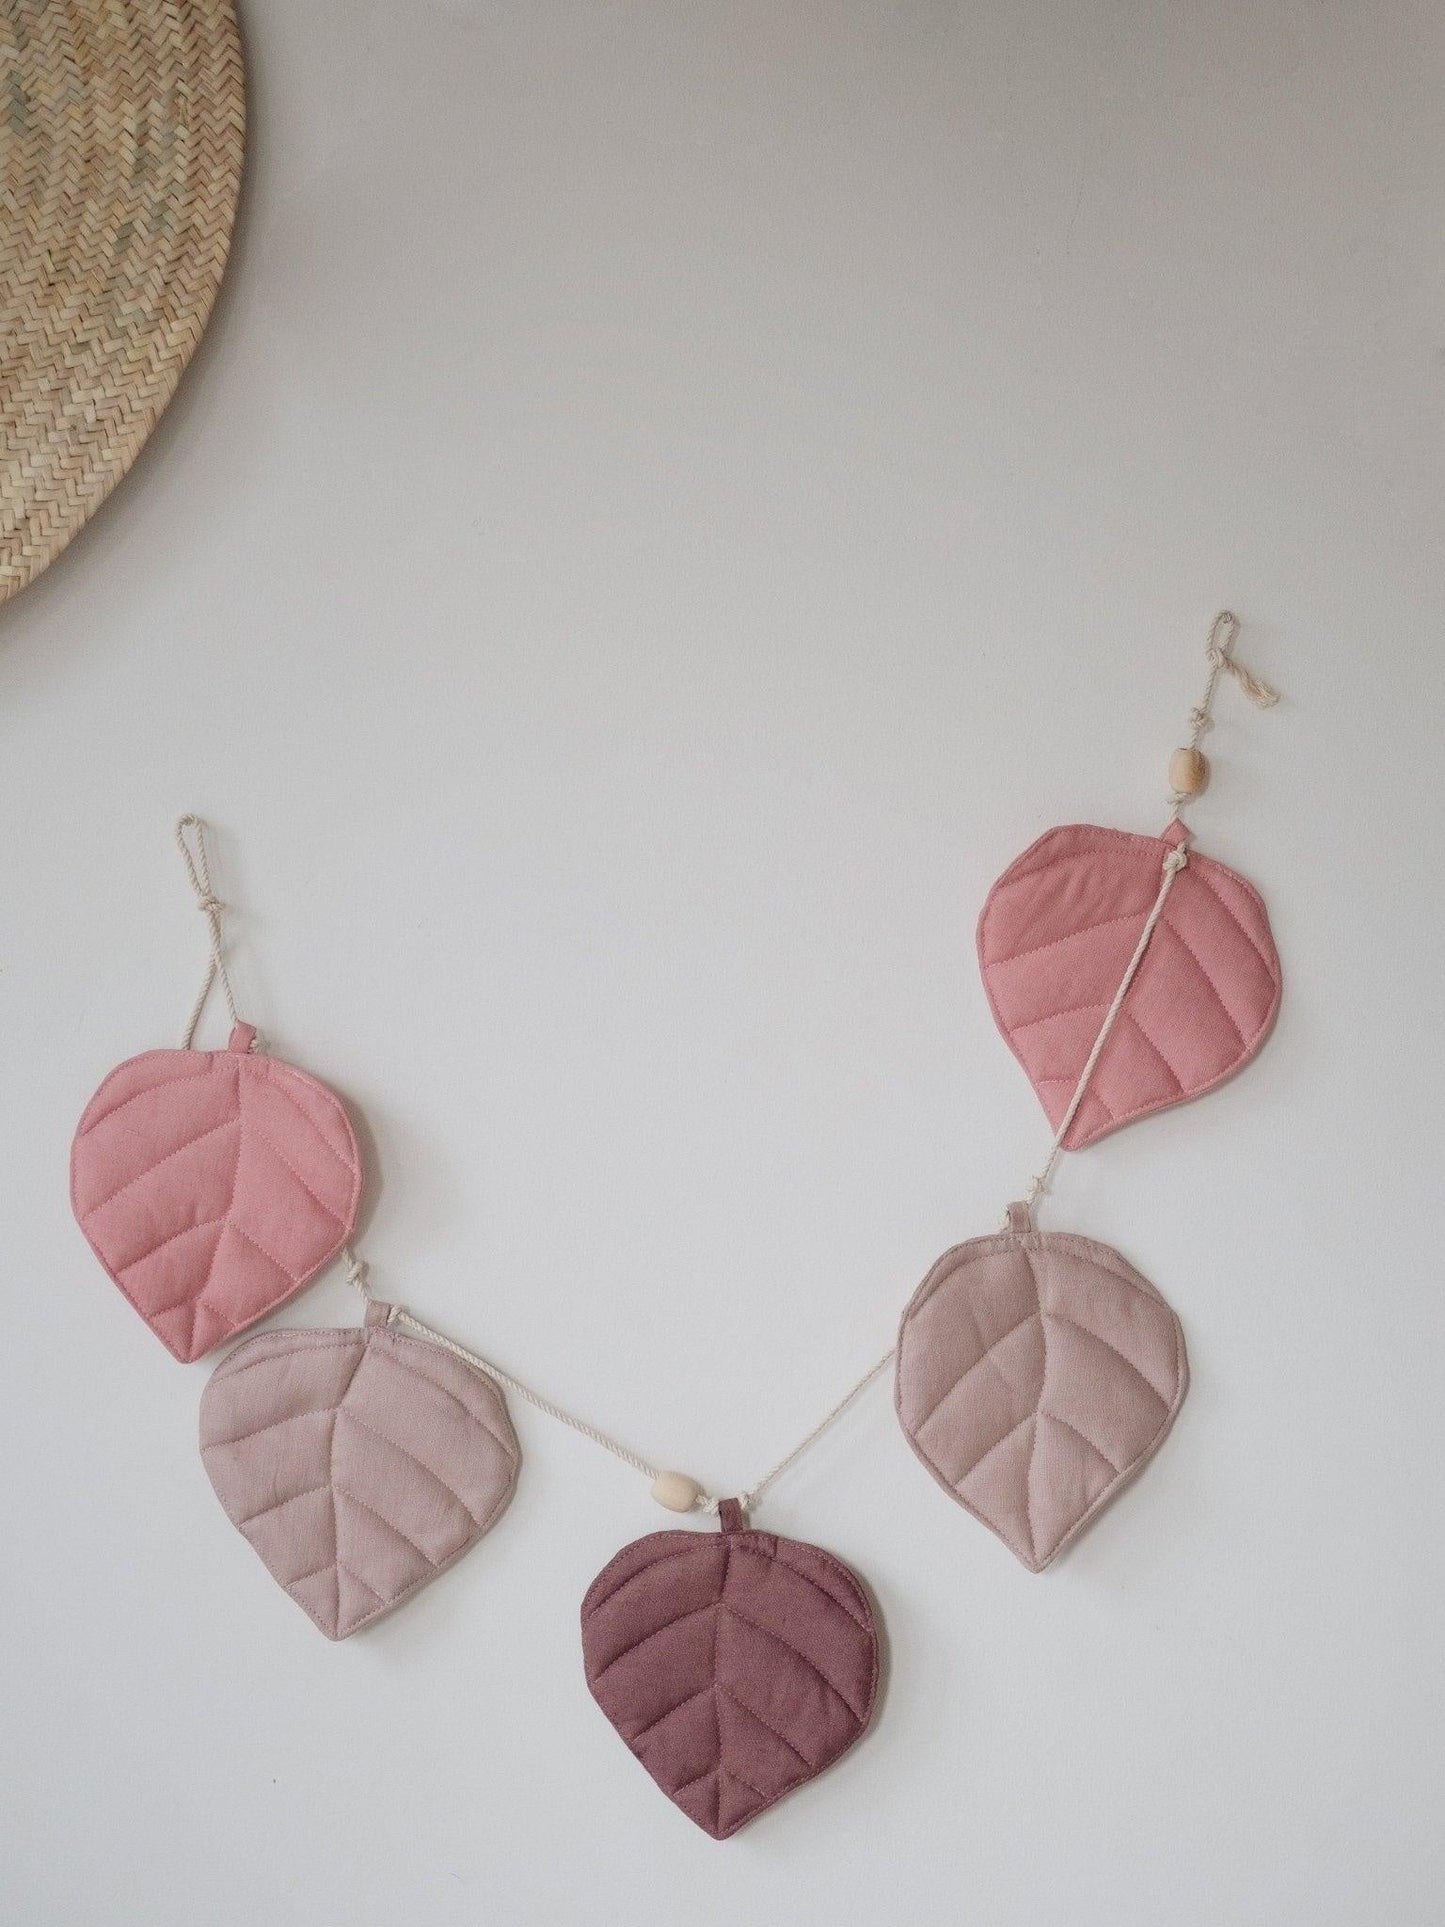 “Pink” Linen Garland with Leaves